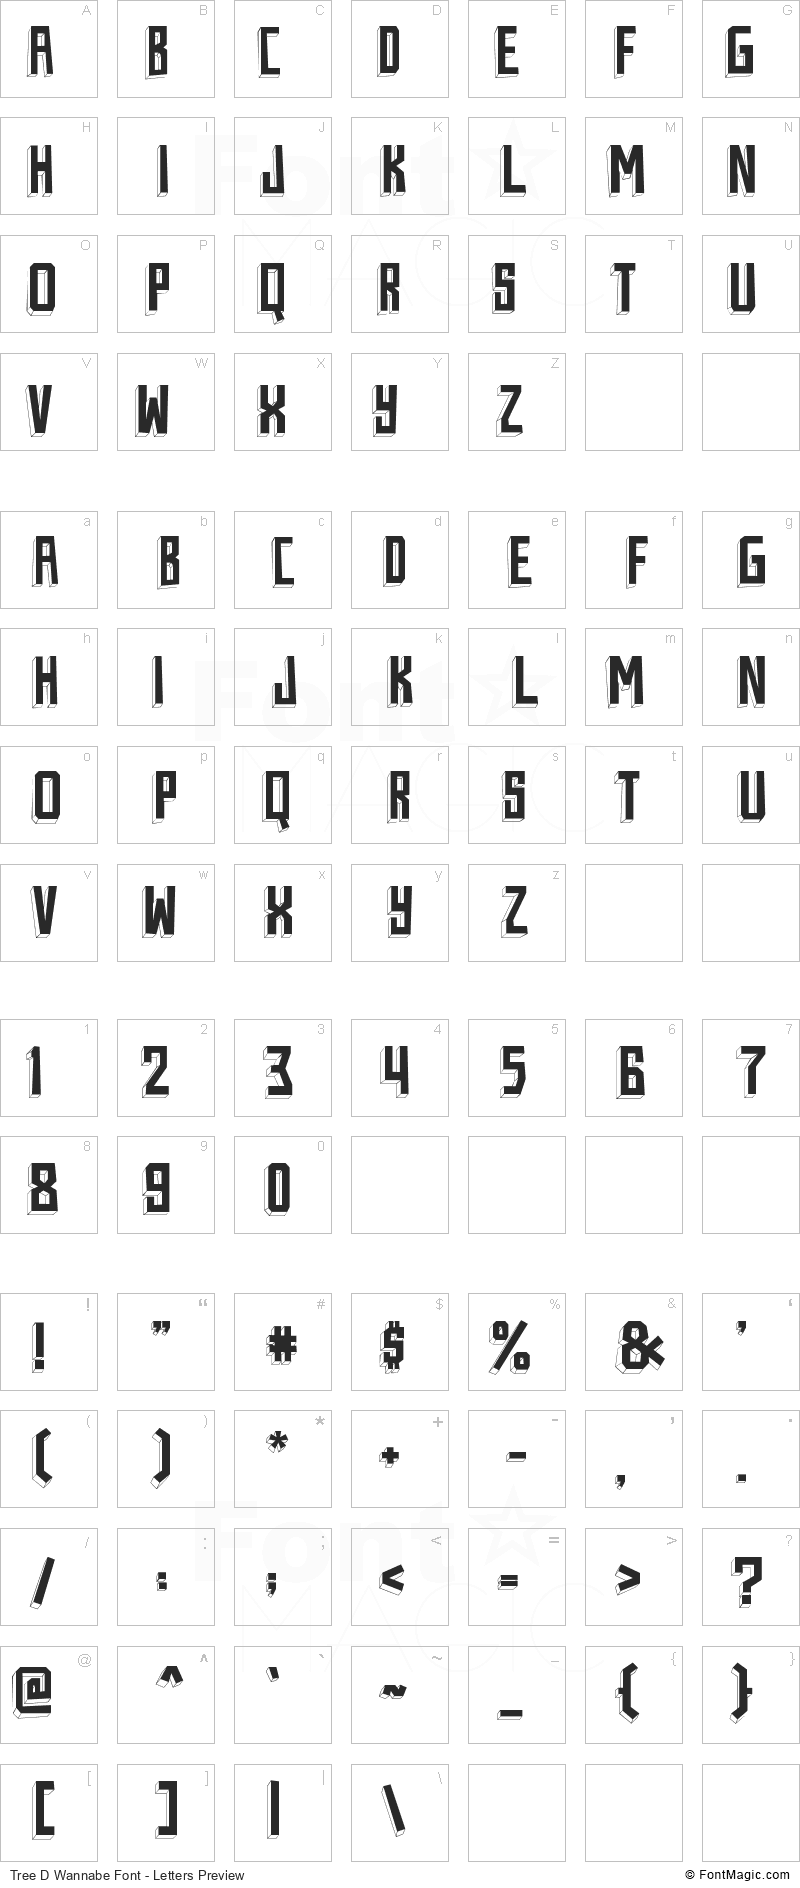 Tree D Wannabe Font - All Latters Preview Chart